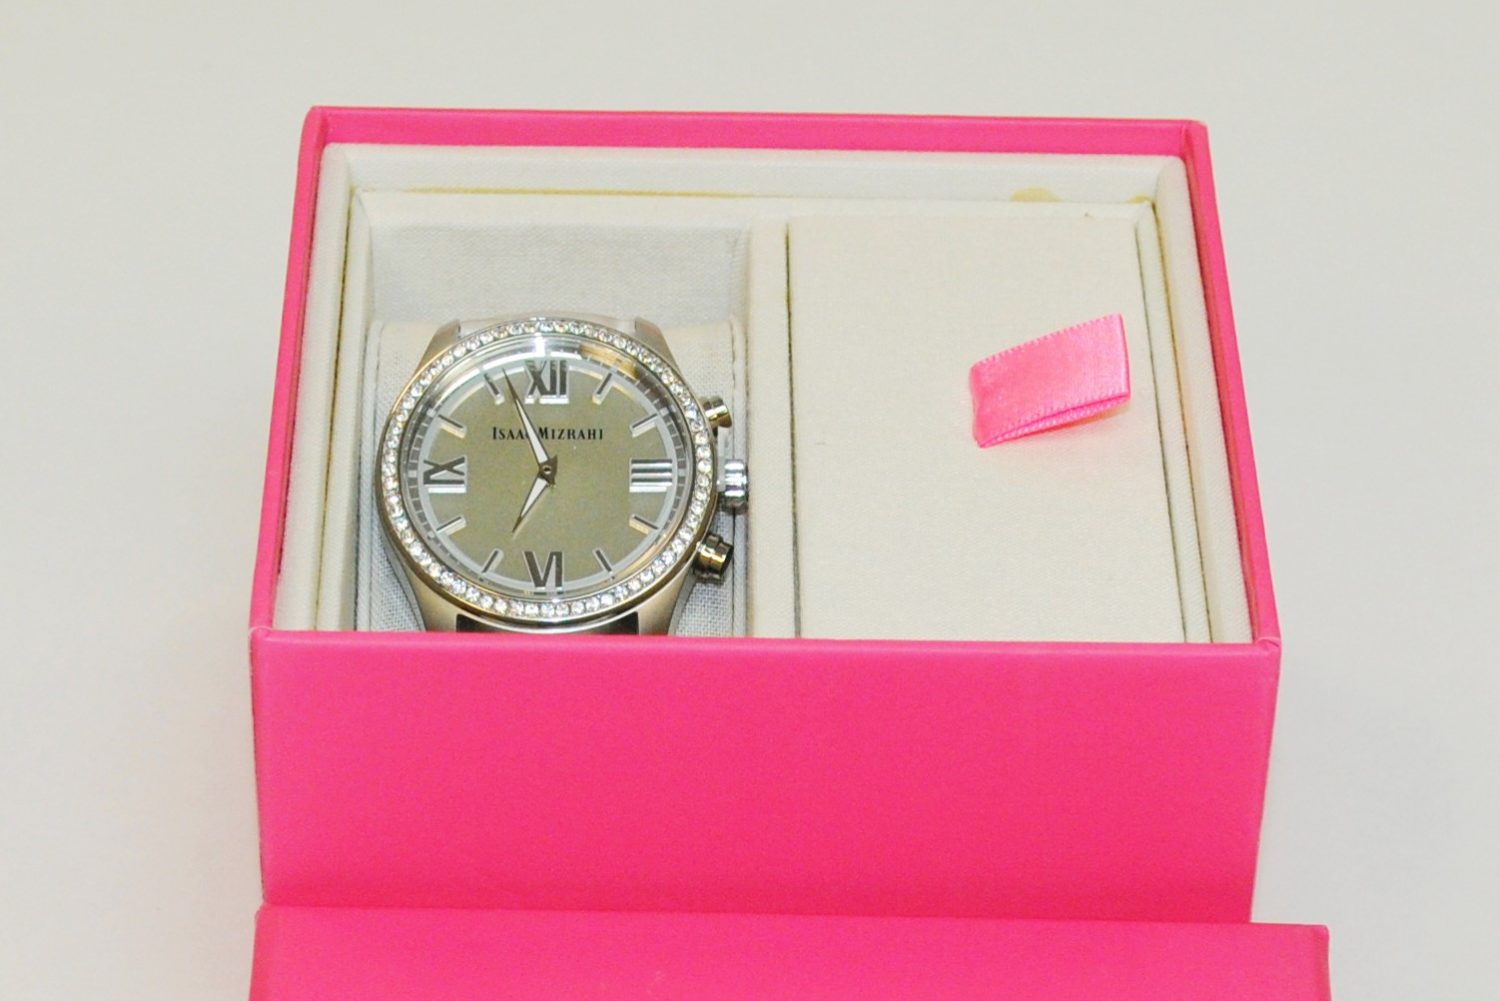 Photo of Isaac Mizrahi smartwatch featuring HP technology and Swarovski crystals in a pink display box.